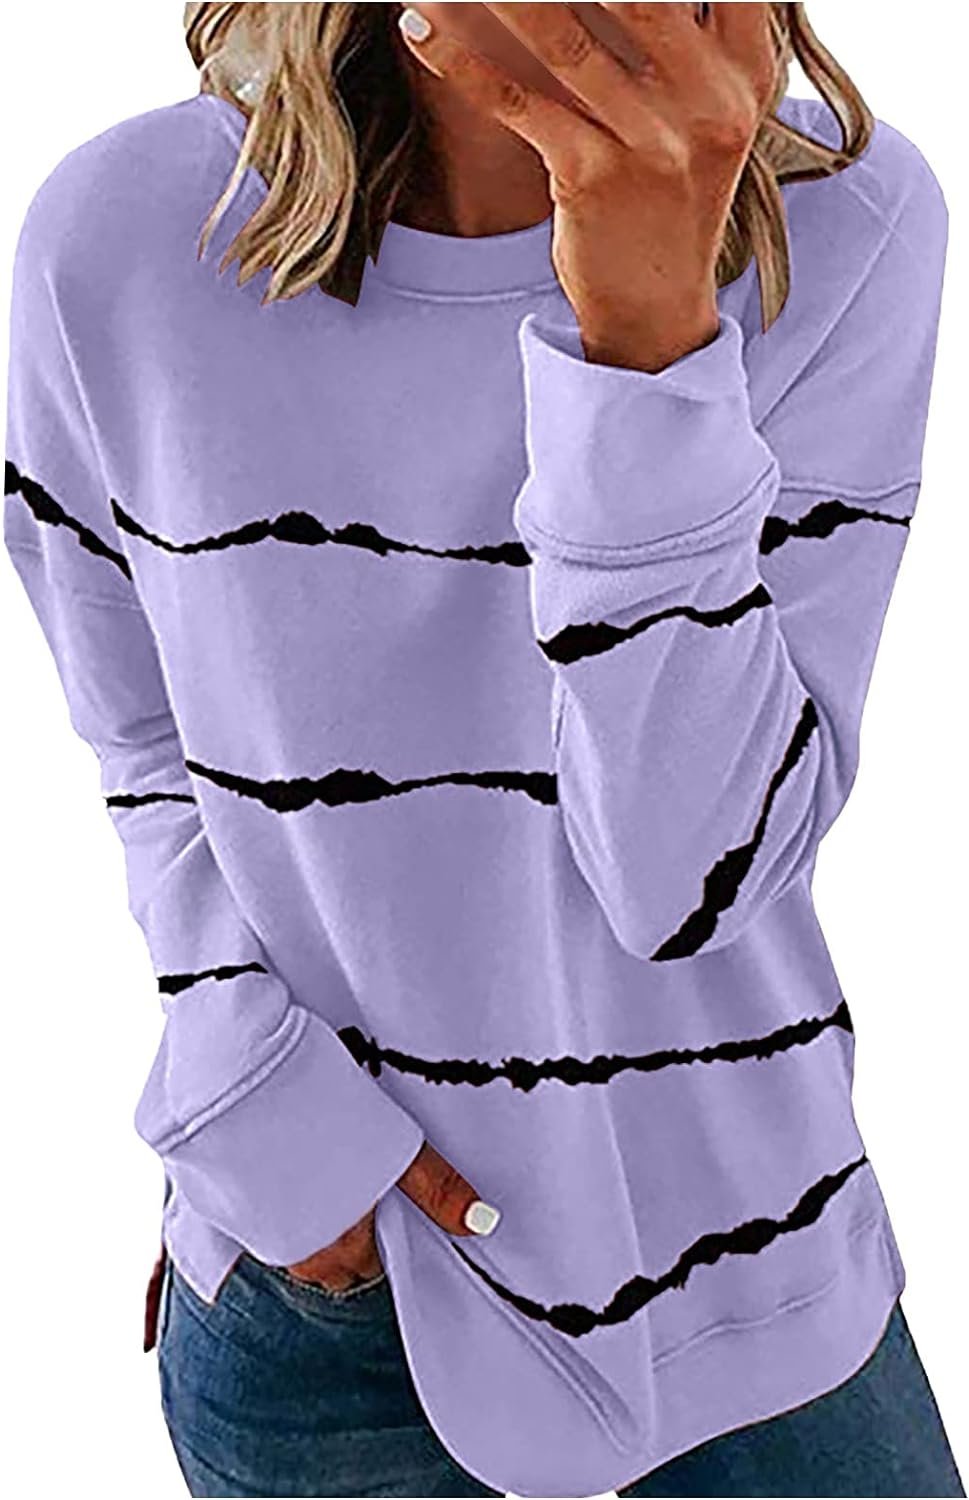 Women’s Oversized T-Shirts Casual Fashion and Comfort Combined